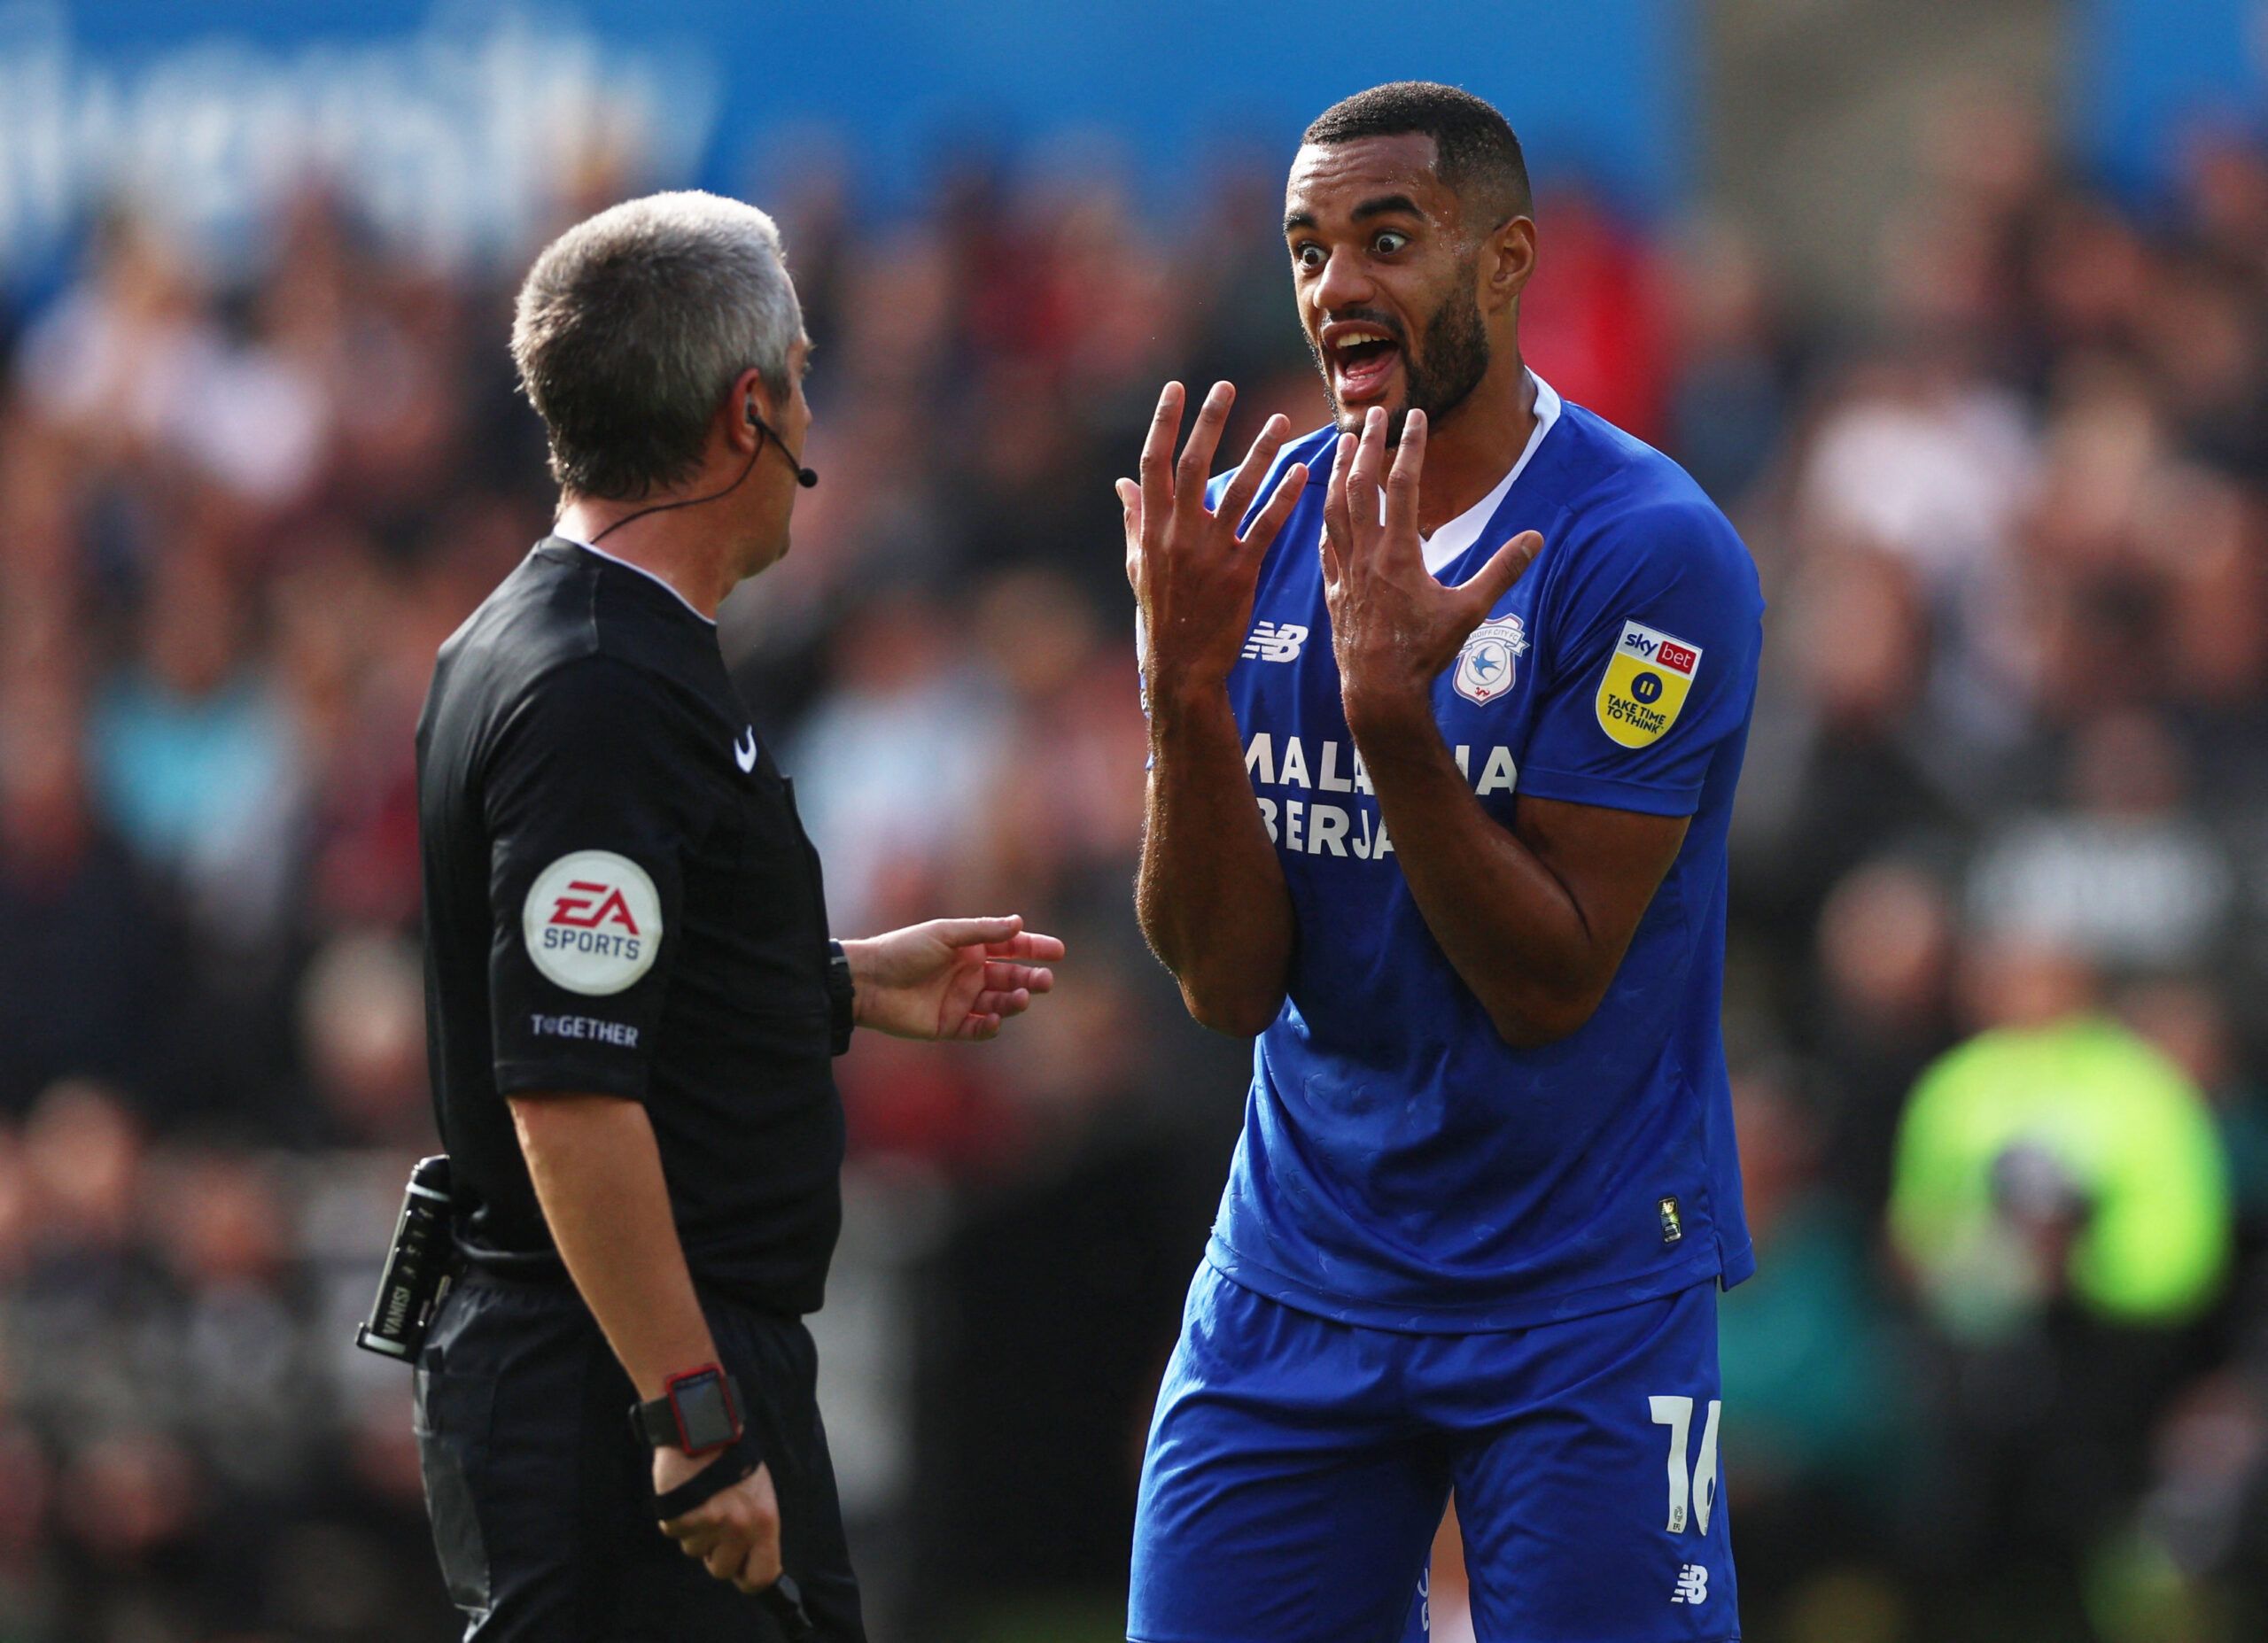 Curtis Nelson's situation at Cardiff City amid Derby County interest ...